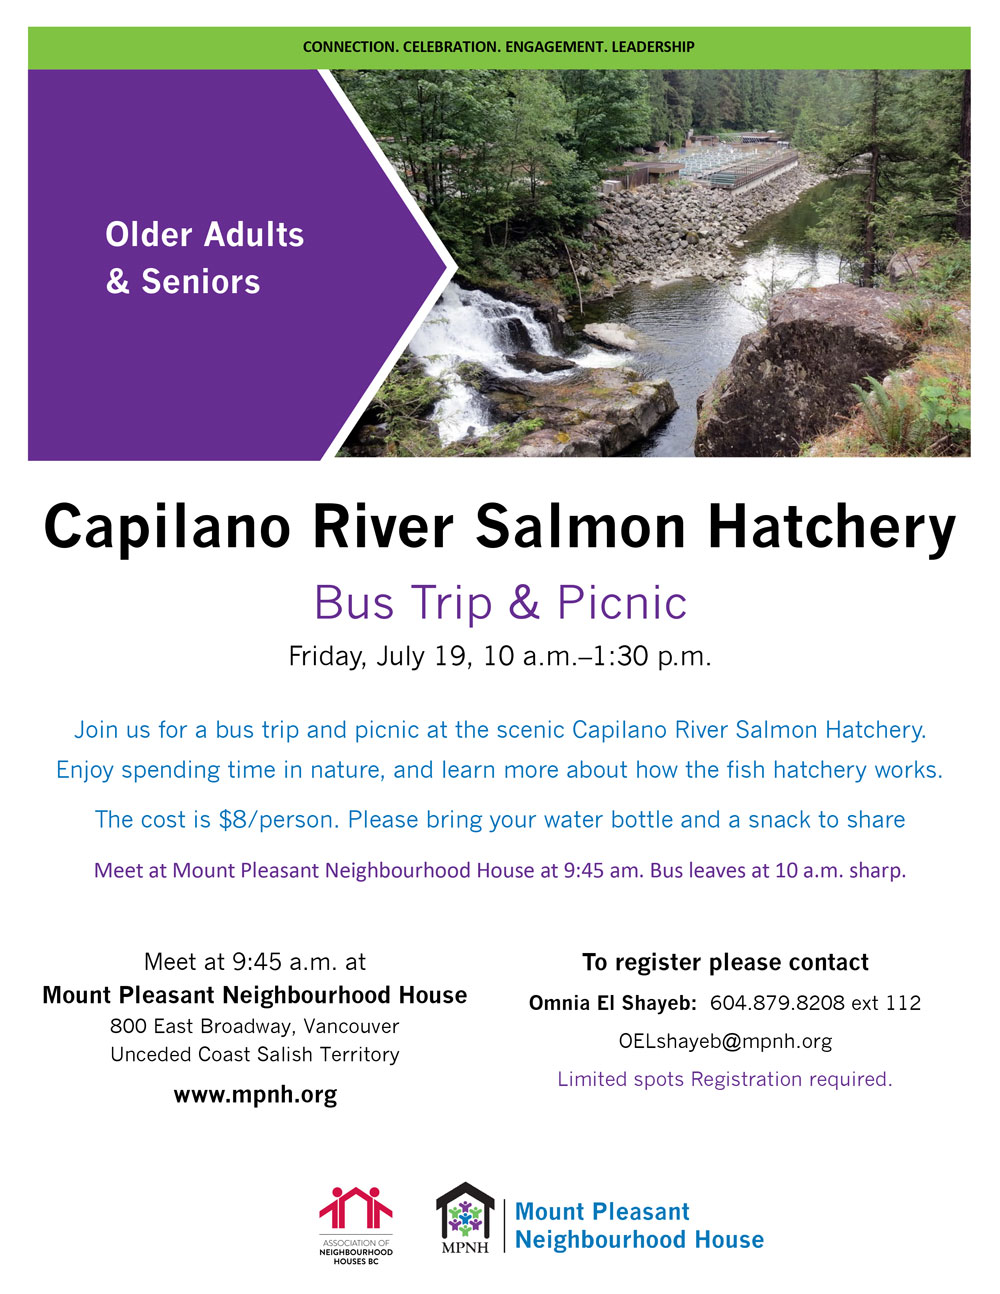 An image of the poster with event details, featuring a photo of trees, rocks and a waterfall into the river, with the hatchery in the background